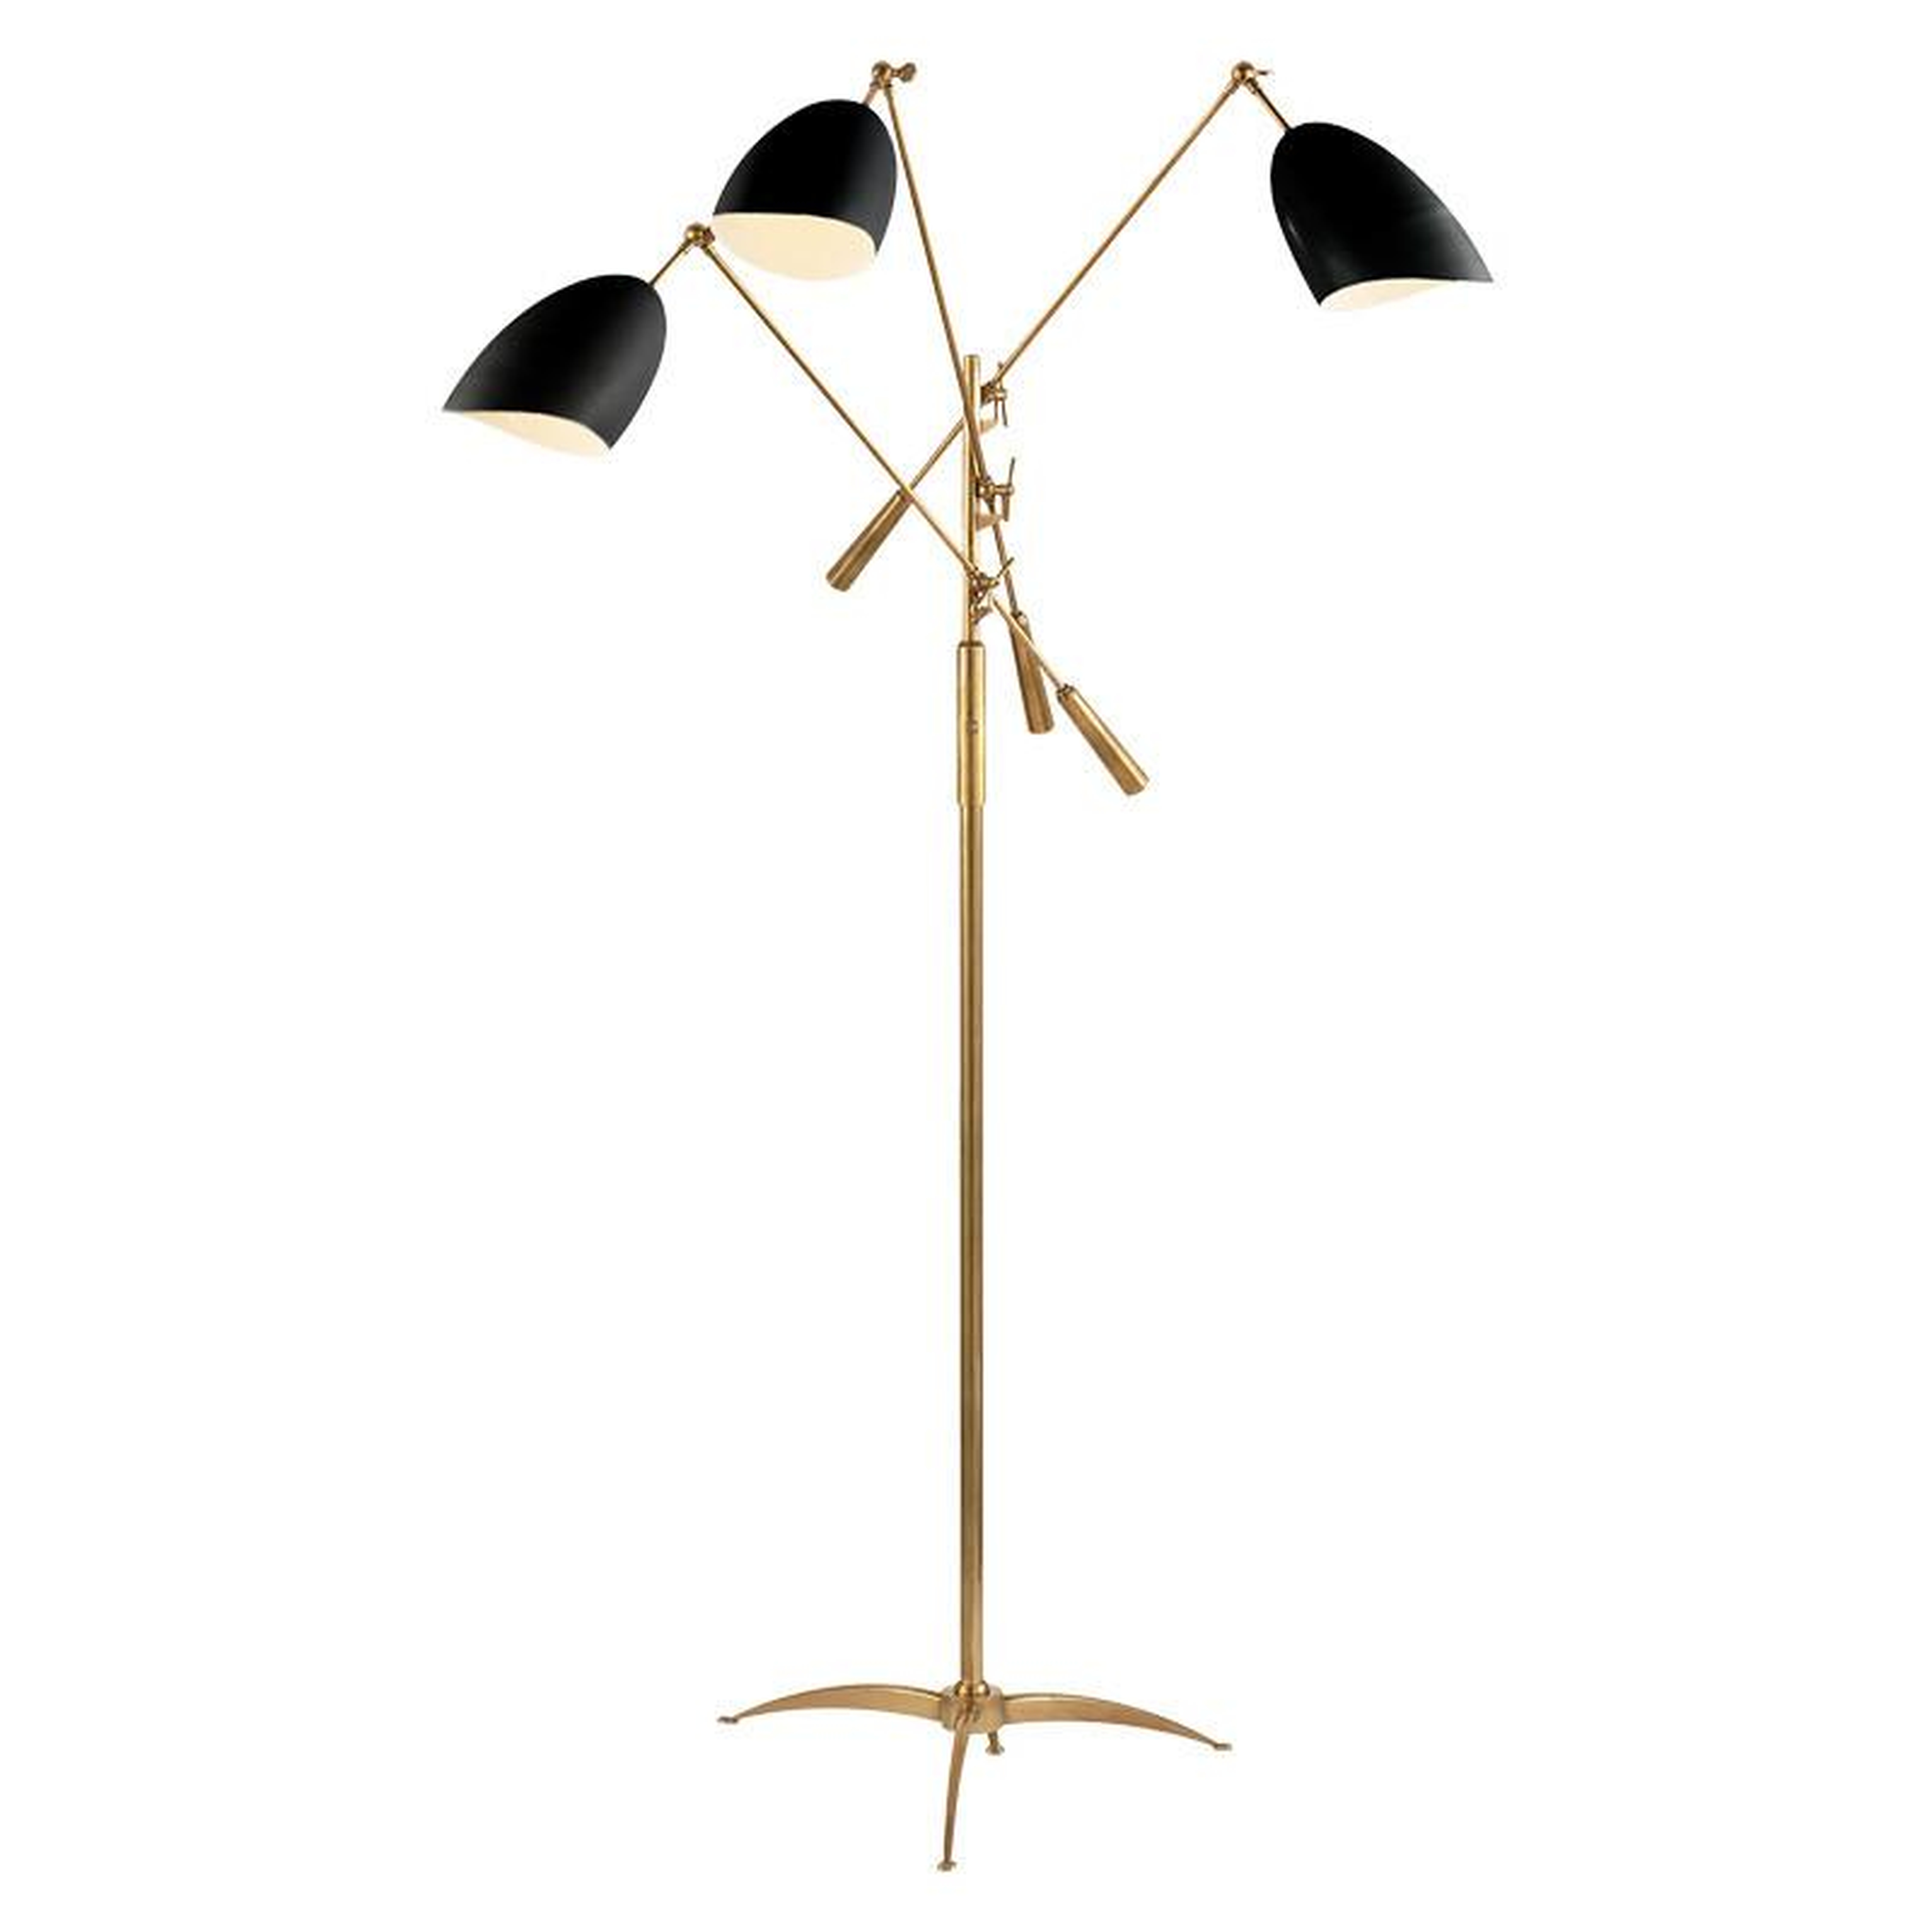 SOMMERARD TRIPLE ARM FLOOR LAMP WITH BLACK SHADE - HAND-RUBBED ANTIQUE BRASS - McGee & Co.